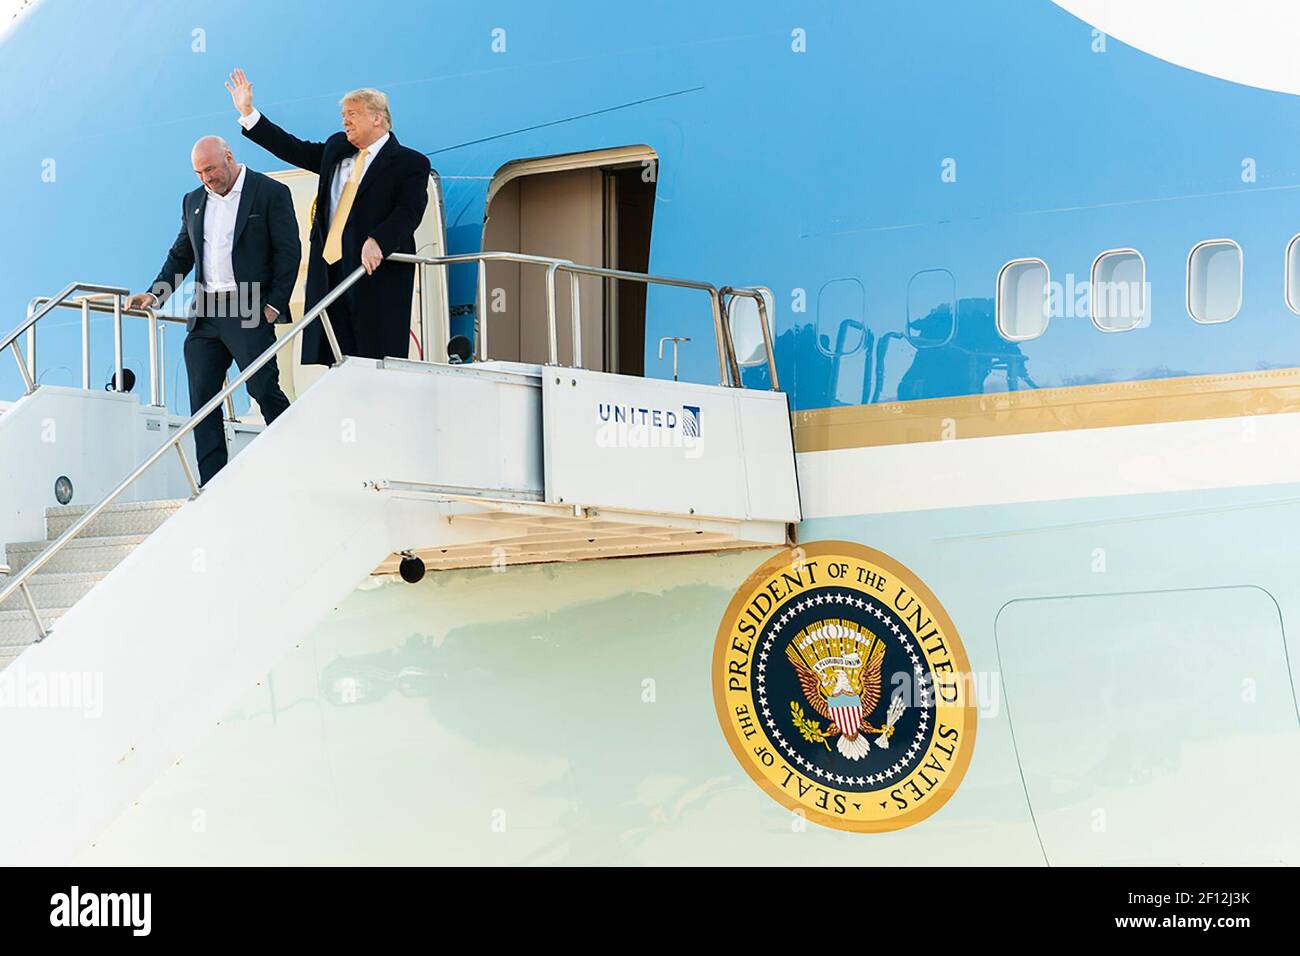 President Donald Trump is joined by Dana White the president of the Ultimate Fighting Championship (UFC) as they disembark Air Force One Thursday Feb. 20 2020 at Peterson Air Force Base in Colorado Spring Colo. Stock Photo